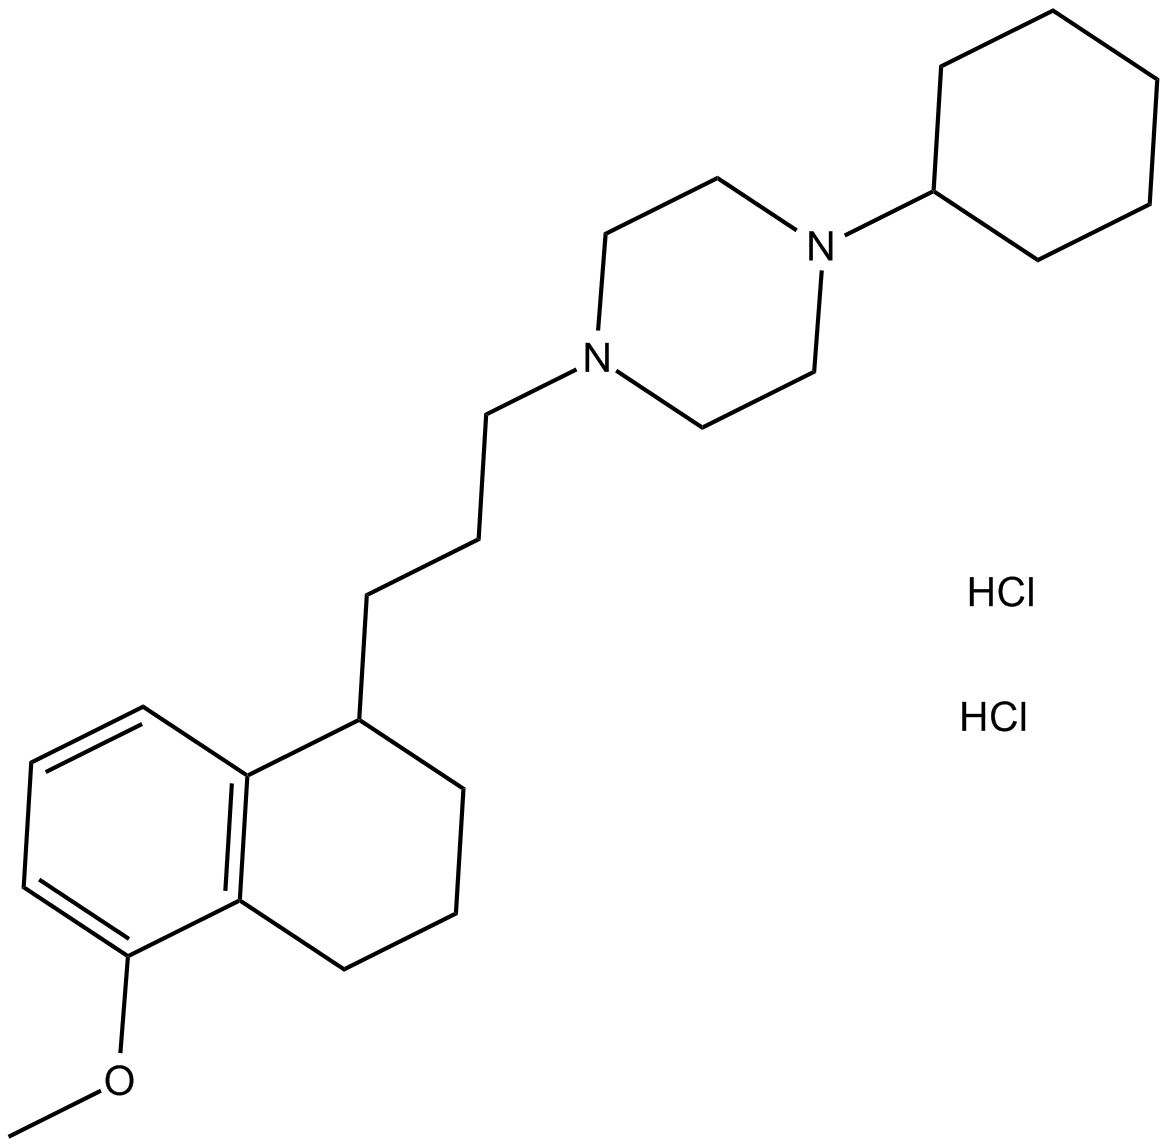 PB 28 dihydrochloride  Chemical Structure